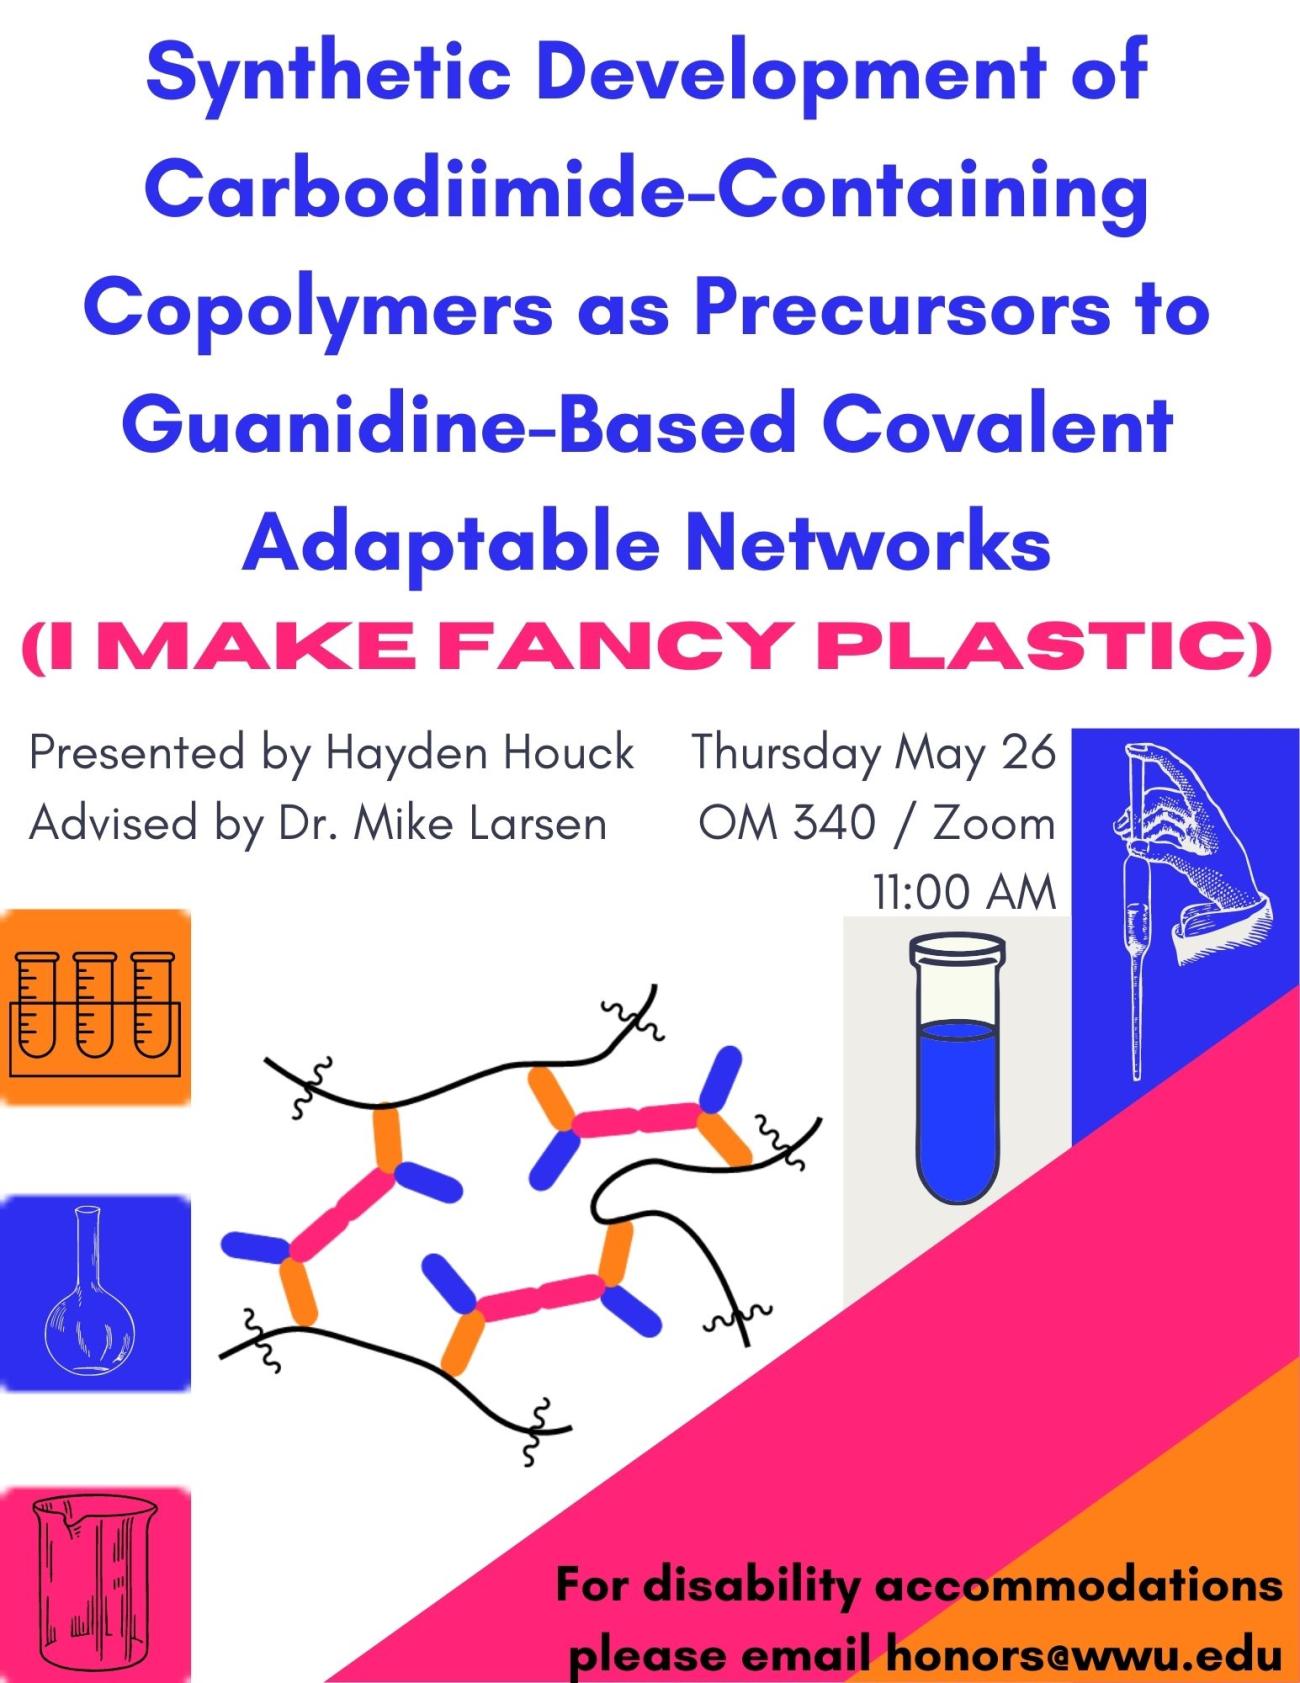 A white poster with blue, orange, and magenta color blockings, each containing a drawing of glassware and a diagram of a polymer. Text reads "Synthetic Development of Carbodiimide-Containing Copolymers as Precursors to Guanidine-Based Covalent Adaptable Networks (I make fancy plastics). Presented by Hayden Houck, advised by Dr. Mike Larsen. Presented Thursday May 26 at 11:00 AM in OM340 / Zoom. For disability accommodations please email honors@wwu.edu."